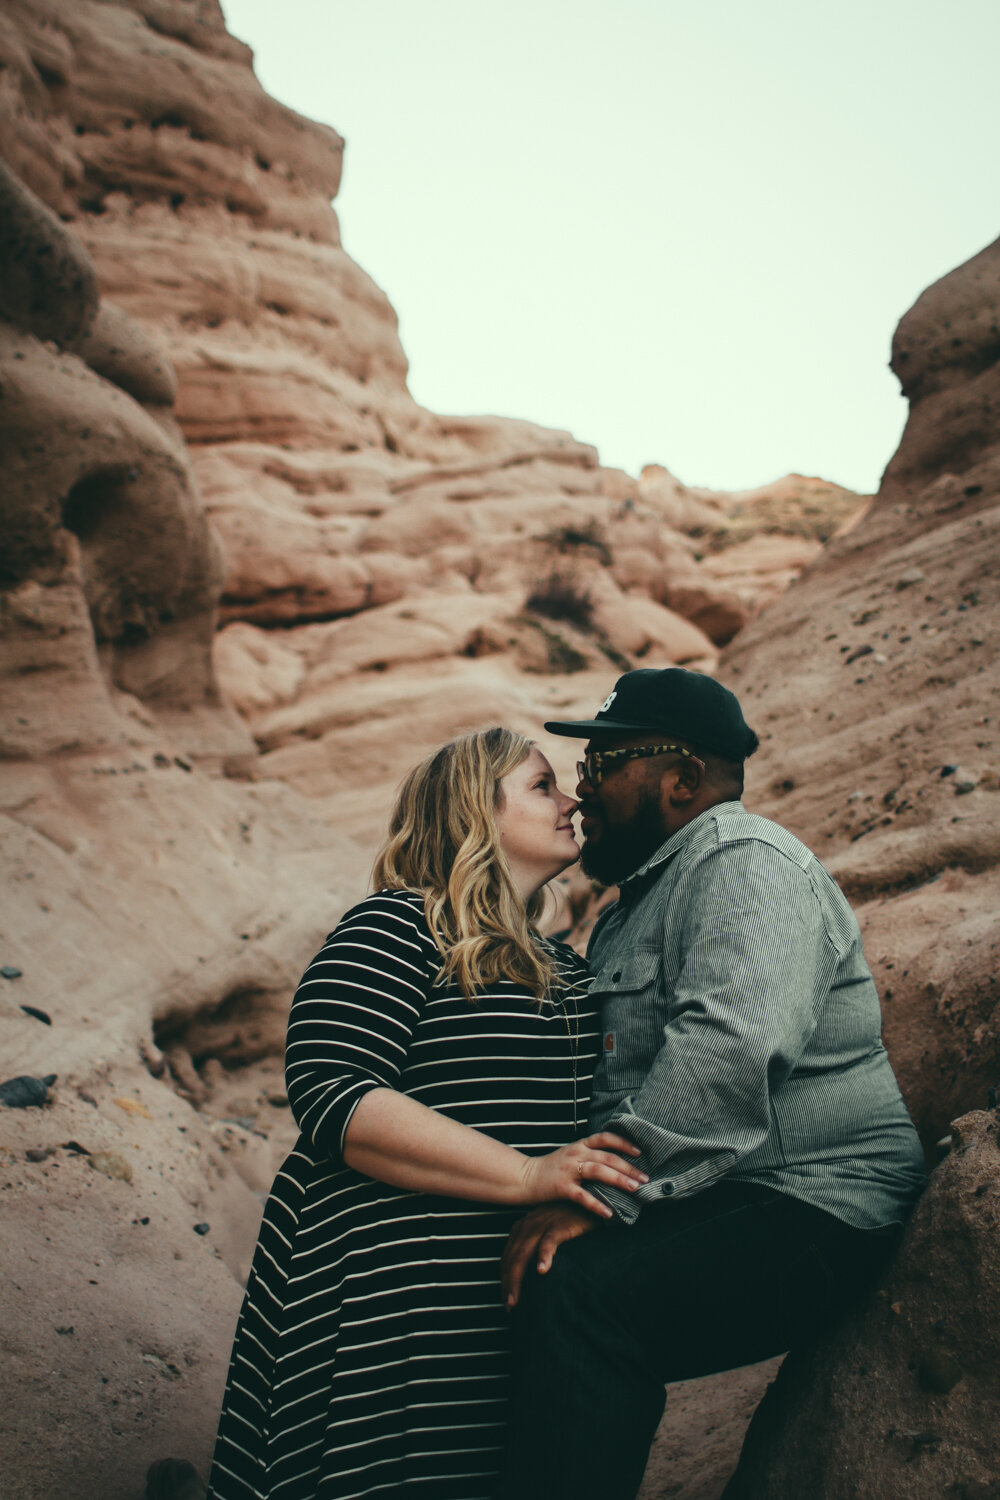 engagement engaged photography photographe marriage wedding photographer corse corsica california desert foothill ranch whiting lifestyle Anza Creative-26.jpg